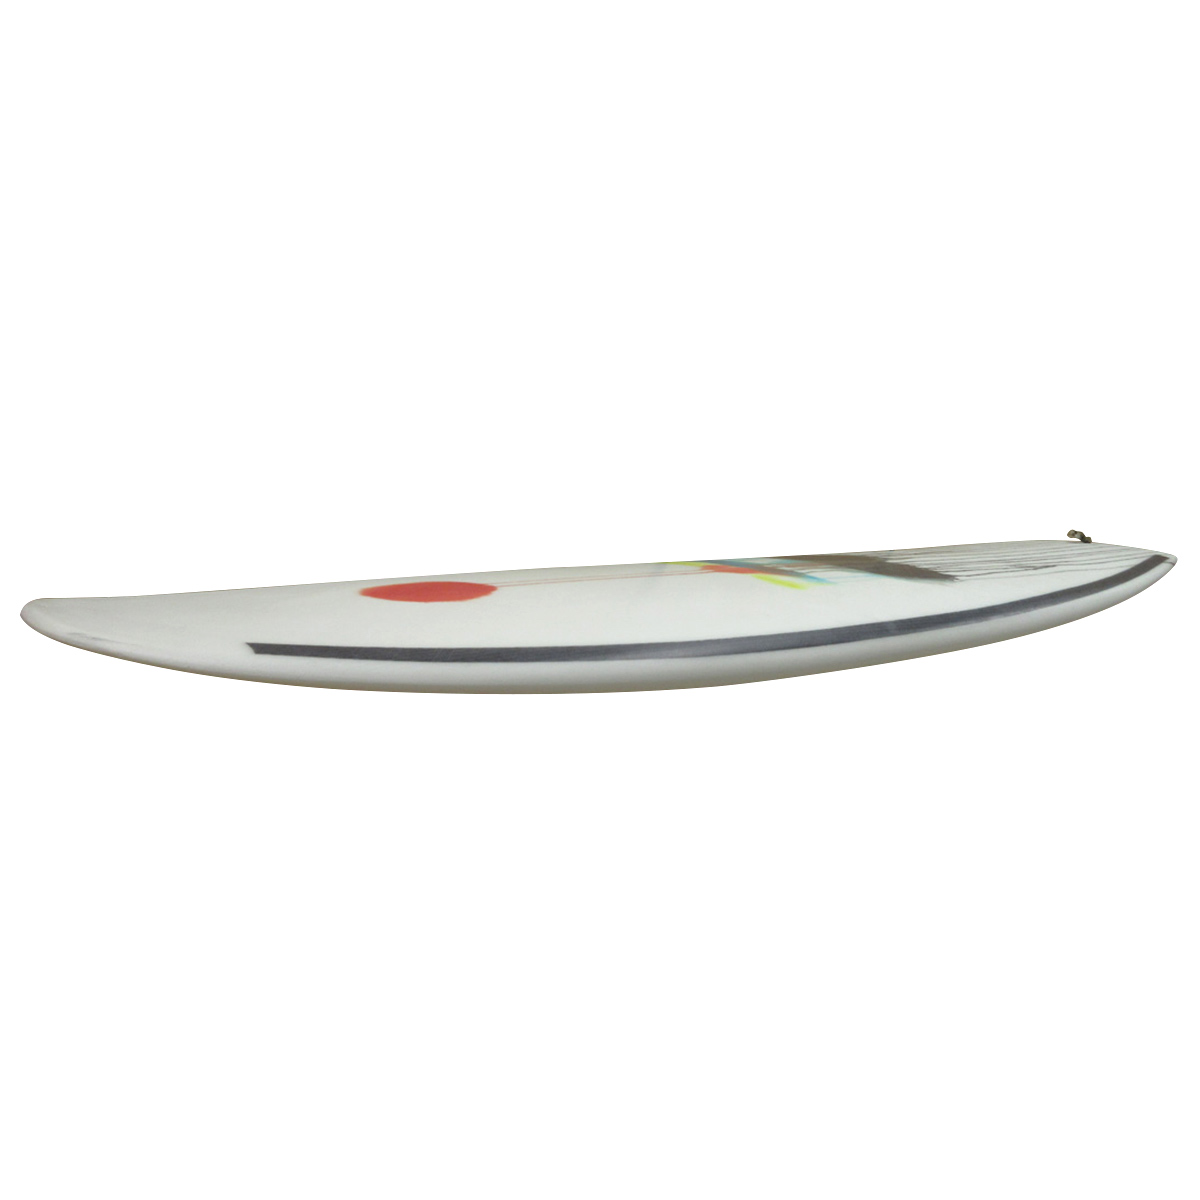 Spacetime Surfboards / Are Two De Too 5`8